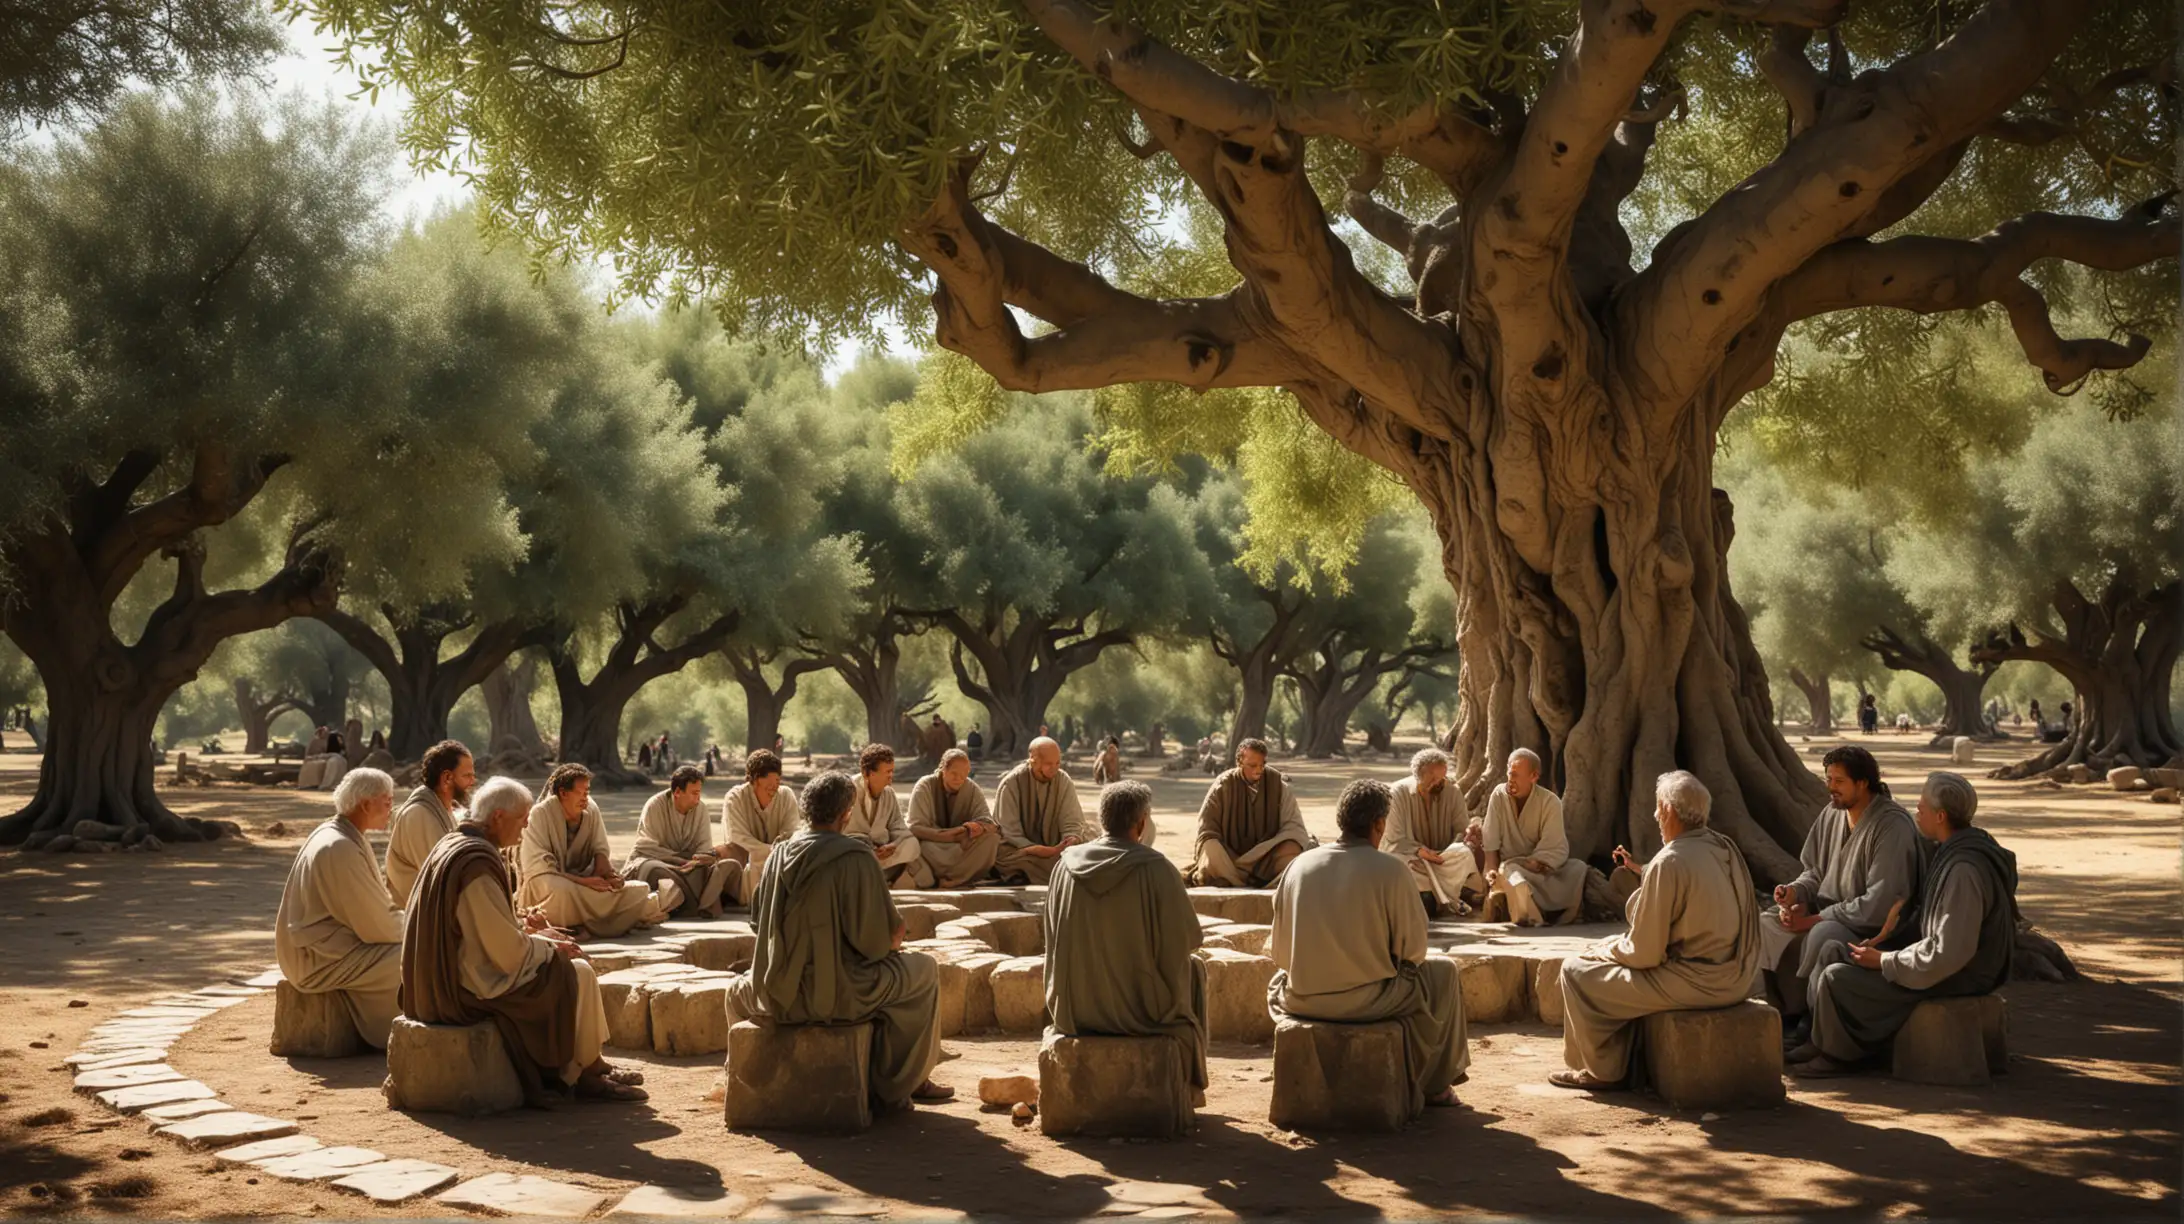 General Visualization: Generate visuals of a group of stoic philosophers engaging in thoughtful discussion under the shade of an ancient olive tree, their faces animated with intellectual curiosity.
Image Description: The image depicts a circle of stoic philosophers gathered around the trunk of a majestic olive tree. They sit on stone benches, engaged in lively conversation and debate. Each philosopher gestures emphatically as they share their insights and perspectives, their faces illuminated by the dappled sunlight filtering through the tree's branches.